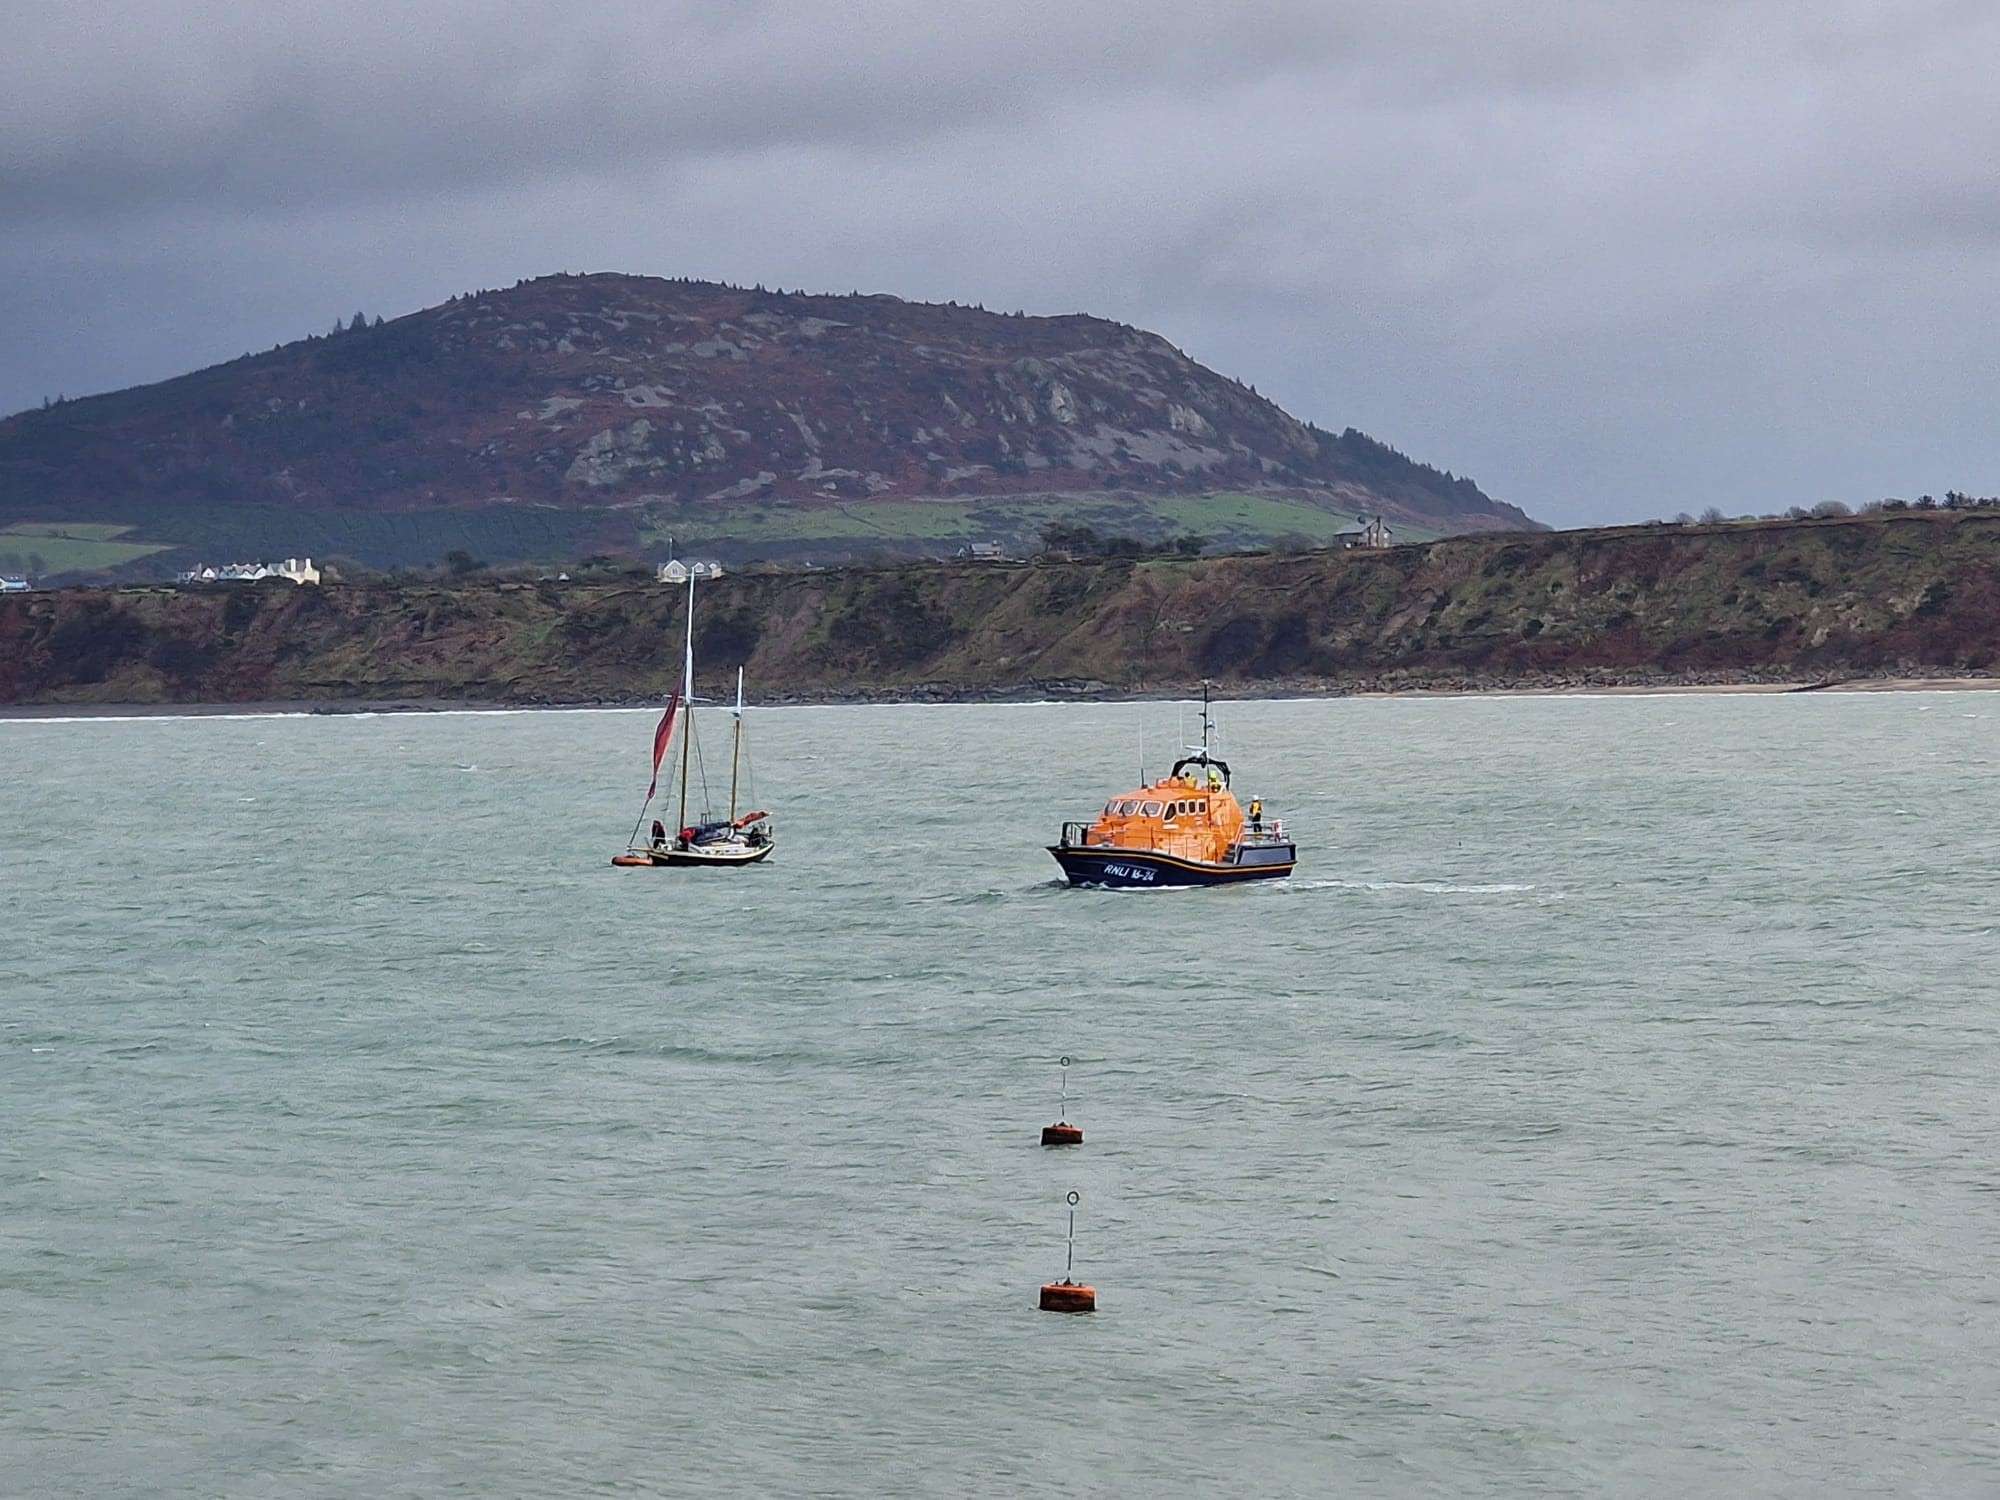 Porthdinllaen lifeboat launches to assist 30-foot ketch in distress